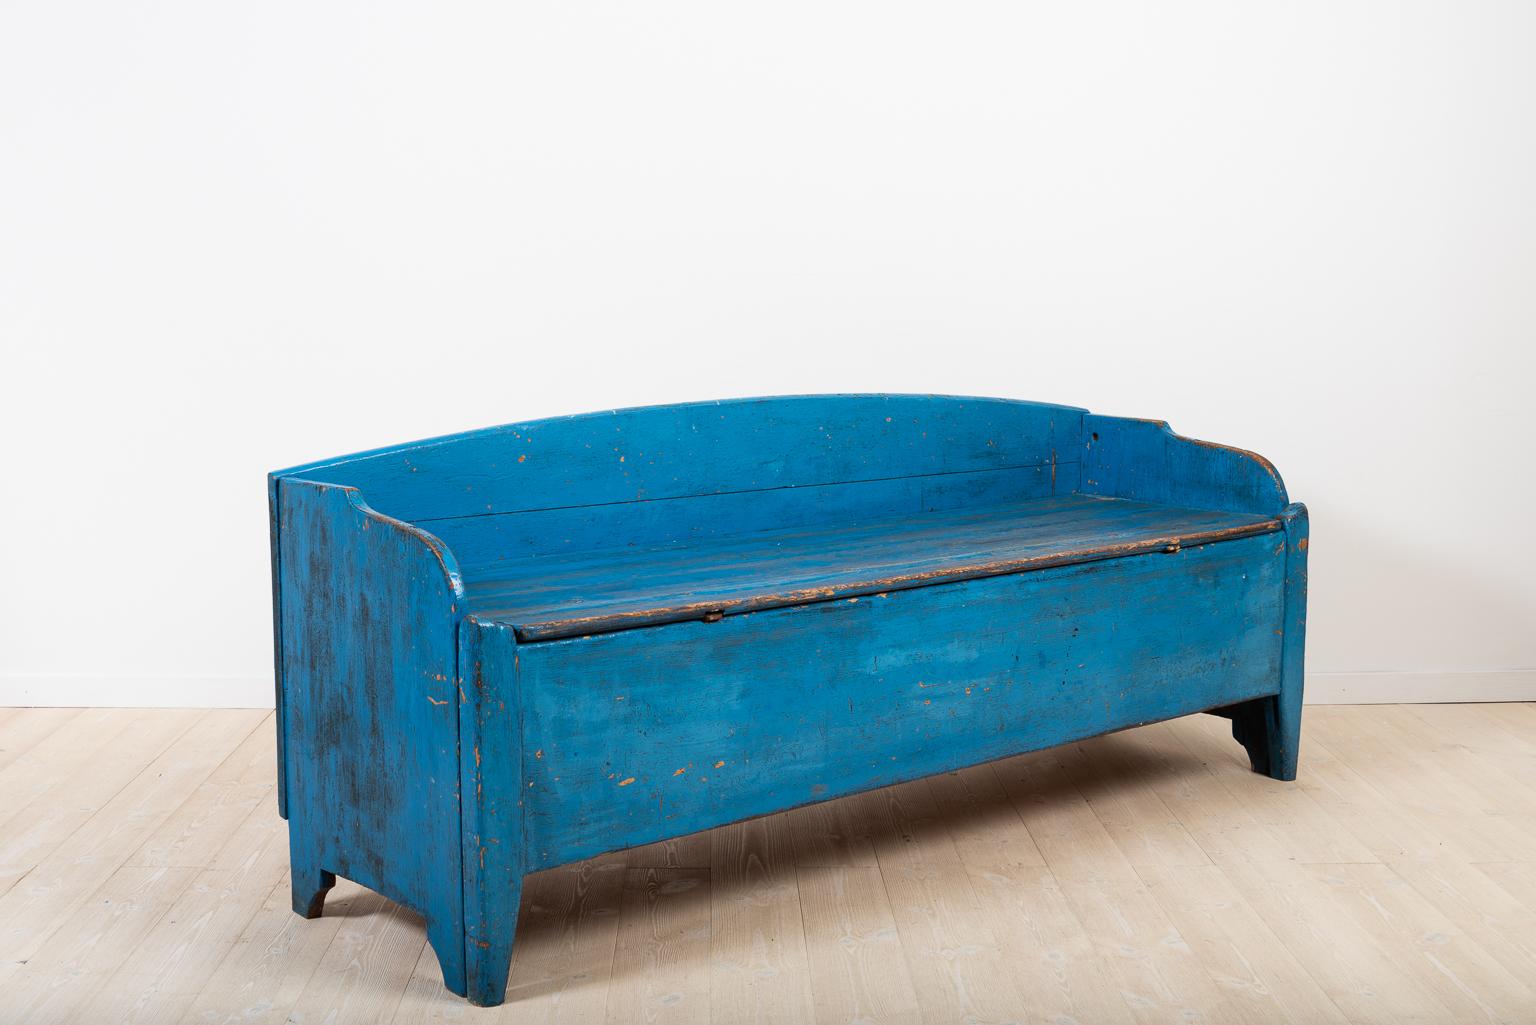 Primitive folk art sofa / bench from northern Sweden - Jämtland. With old blue paint that was painted during the mid 1800s. The bench was manufactured around 1820-1840. As the sofa is an unique original piece with untouched patina will there be